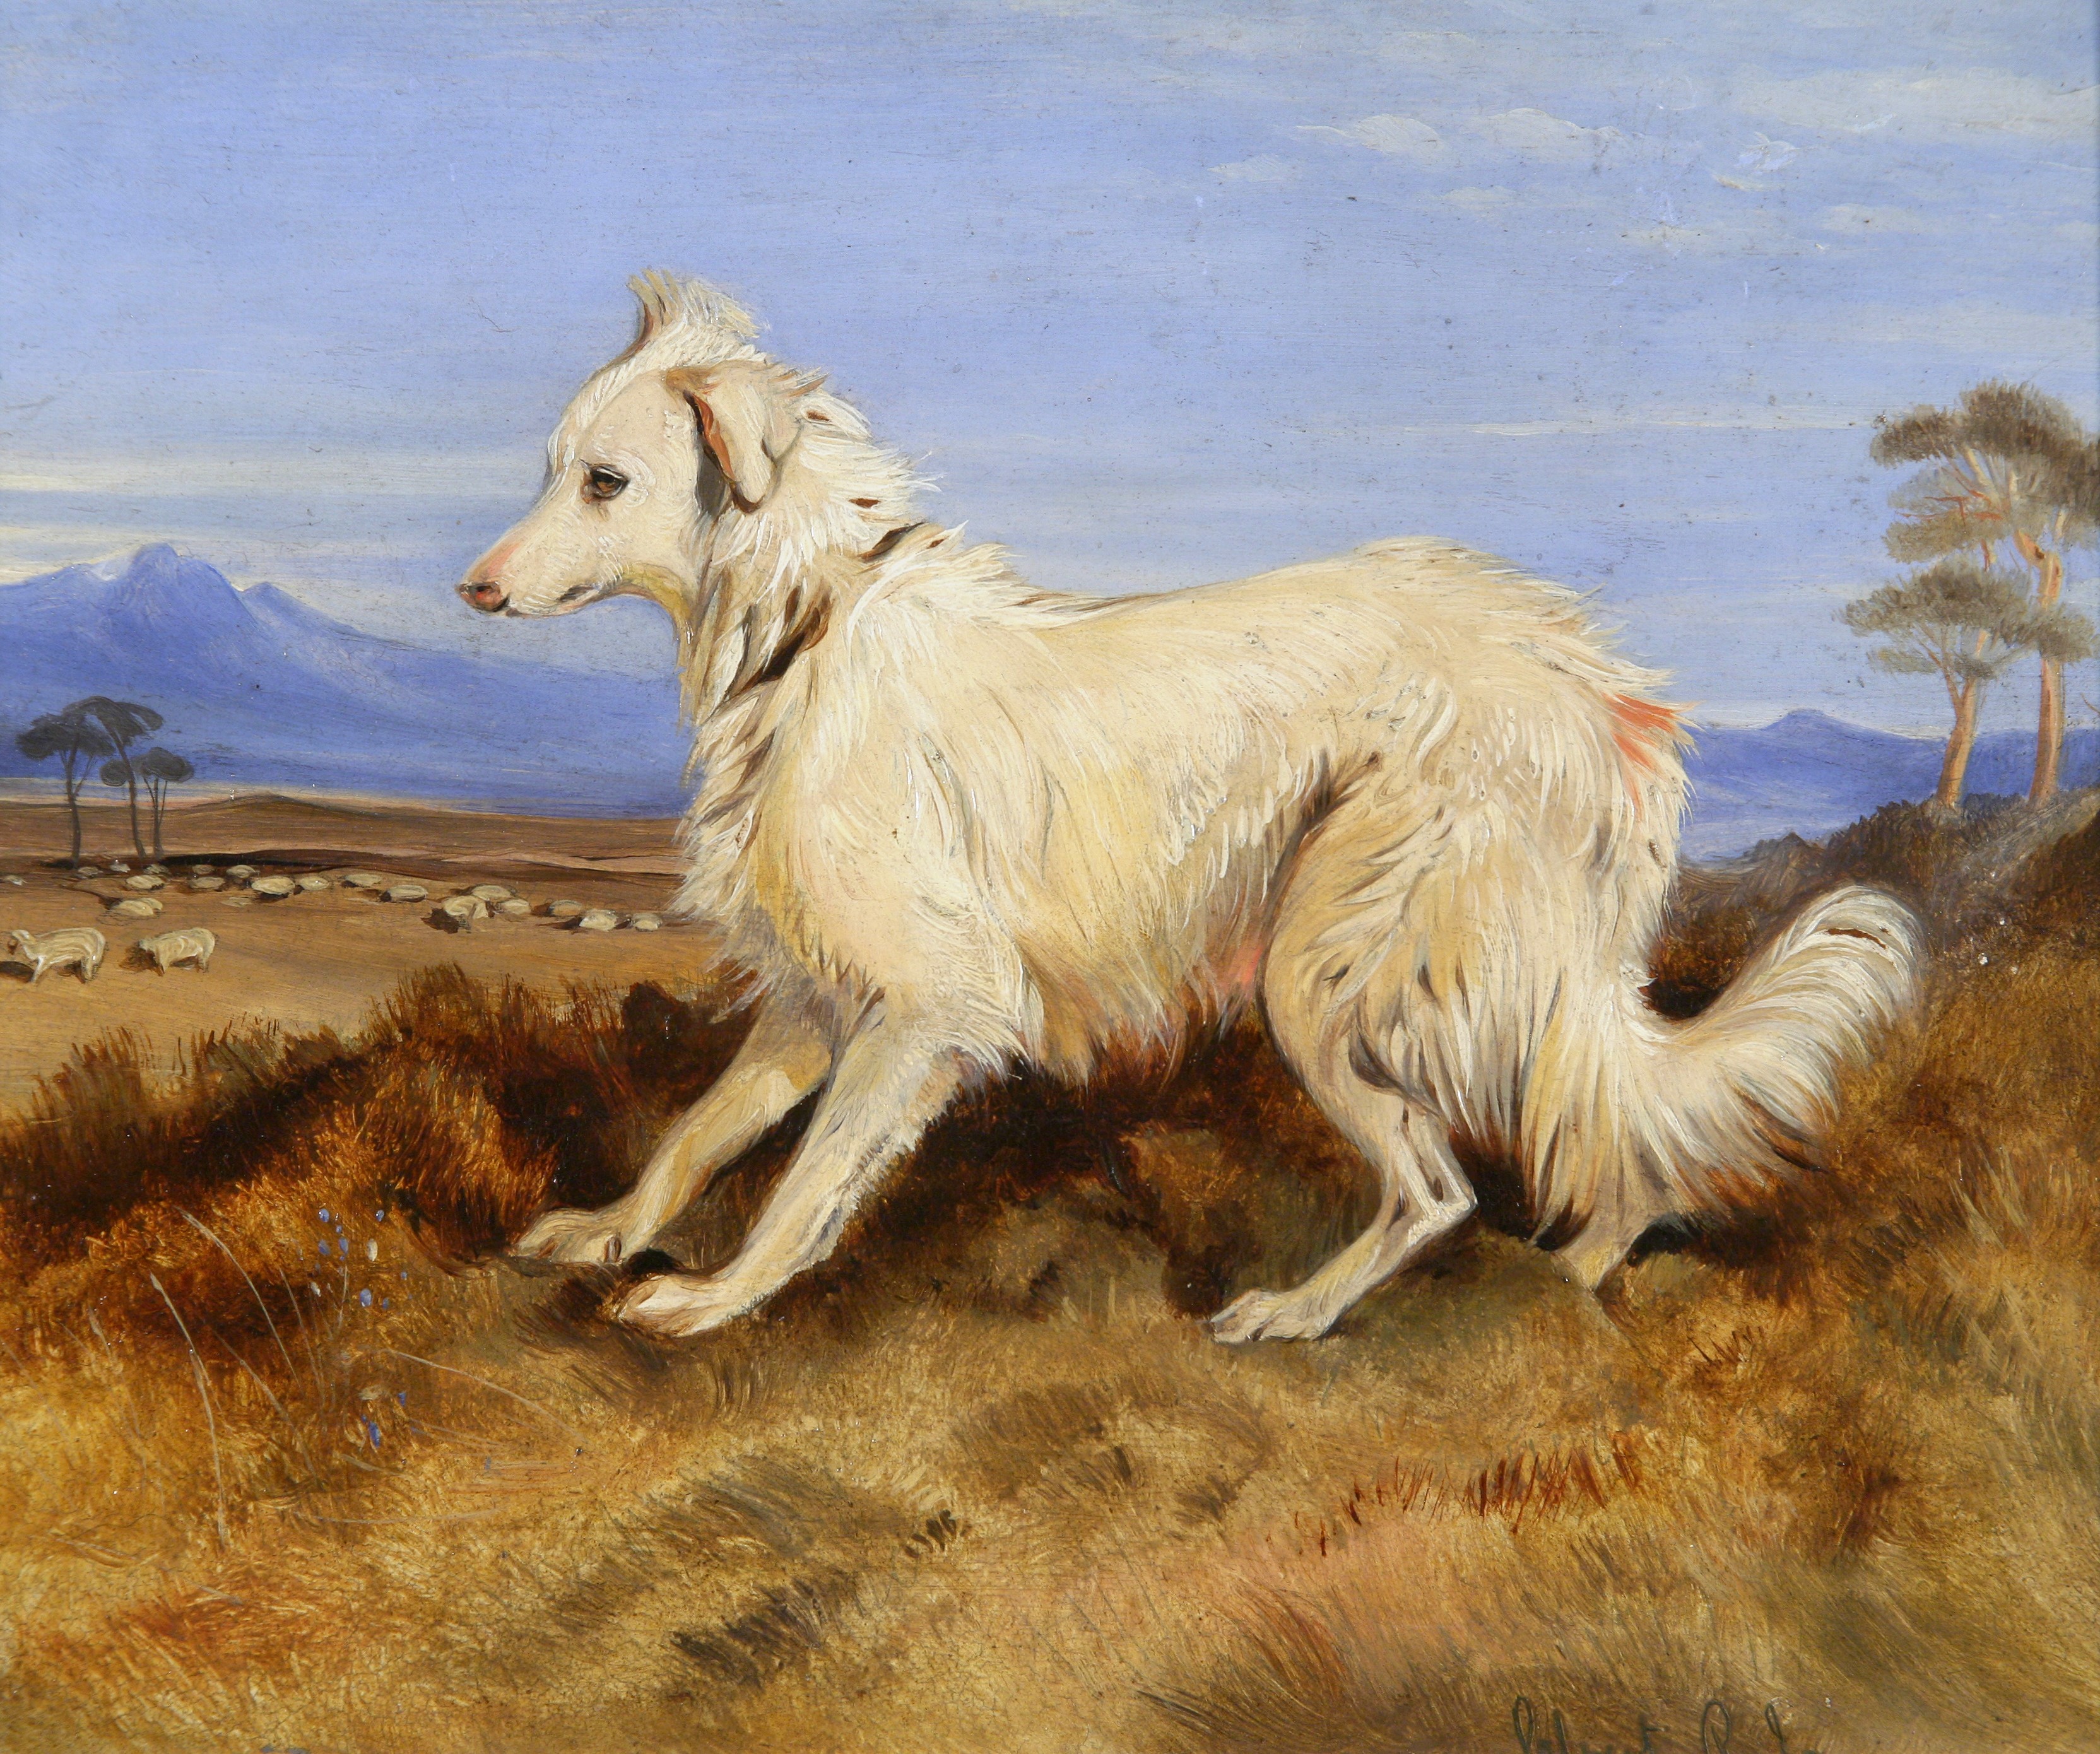 On Animals: A selection of works from the gallery’s collection